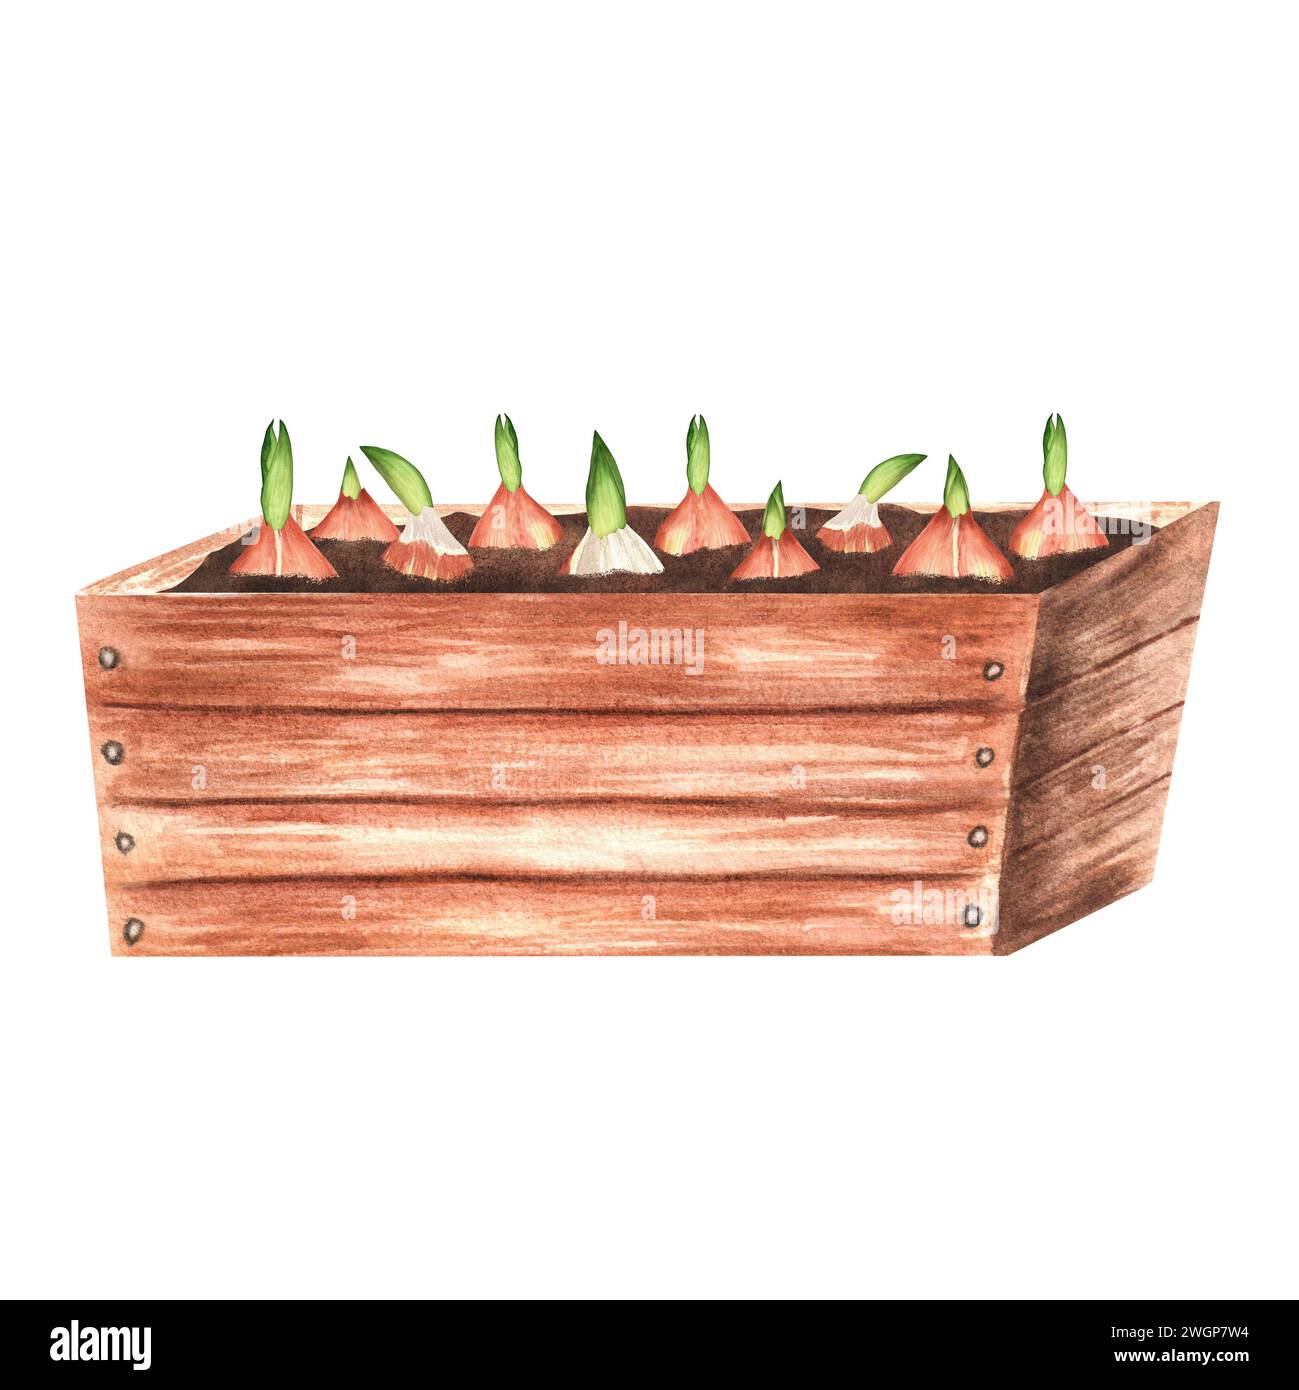 Hand-drawn watercolor illustration. A wooden garden crate with planted tulip bulbs. Horizontal view. Stock Photo